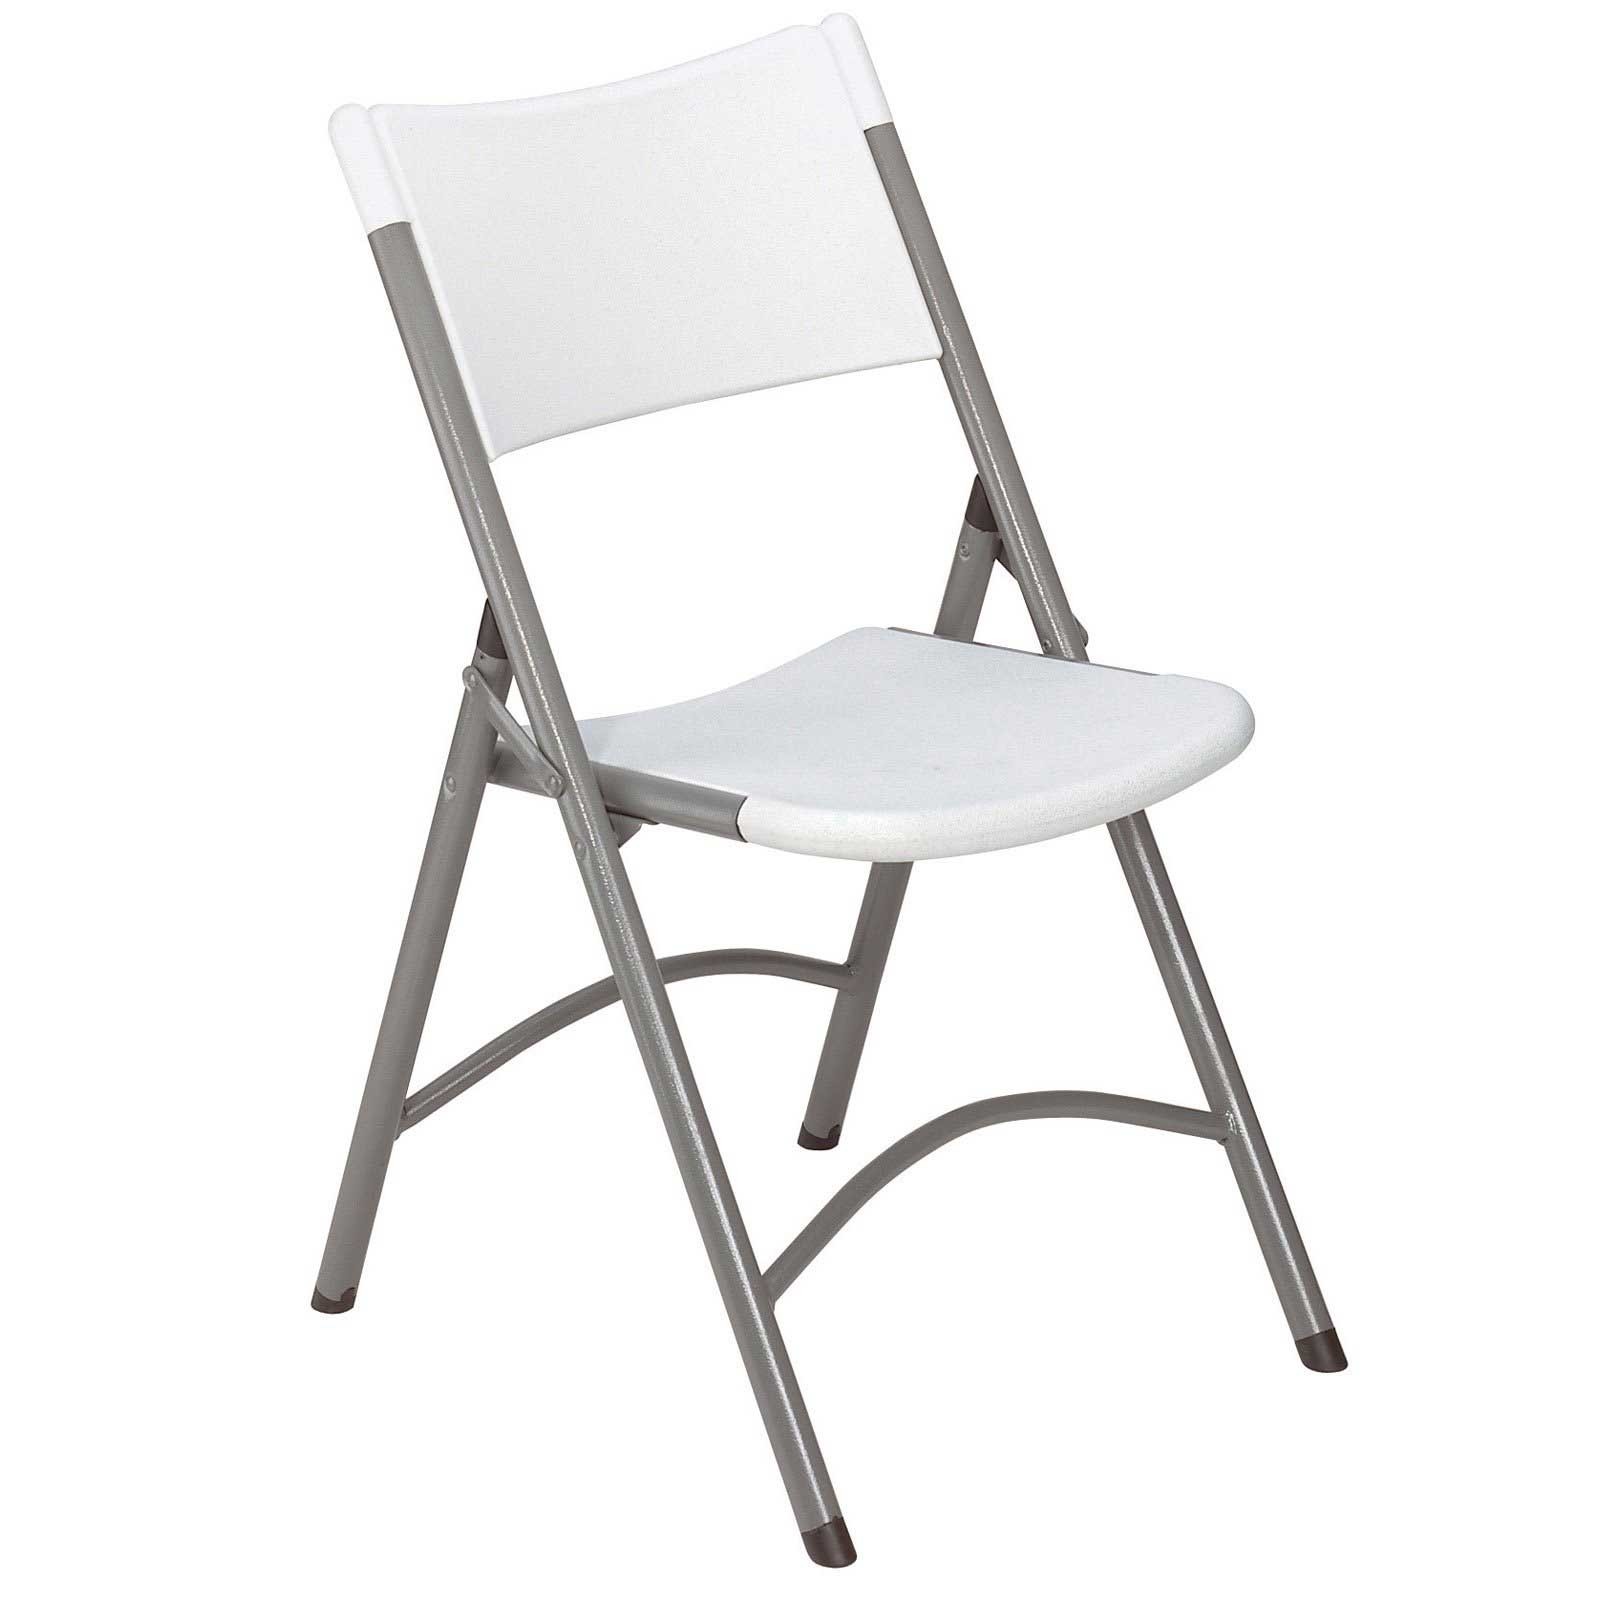 Lightweight folding chairs for extra pleasure 1